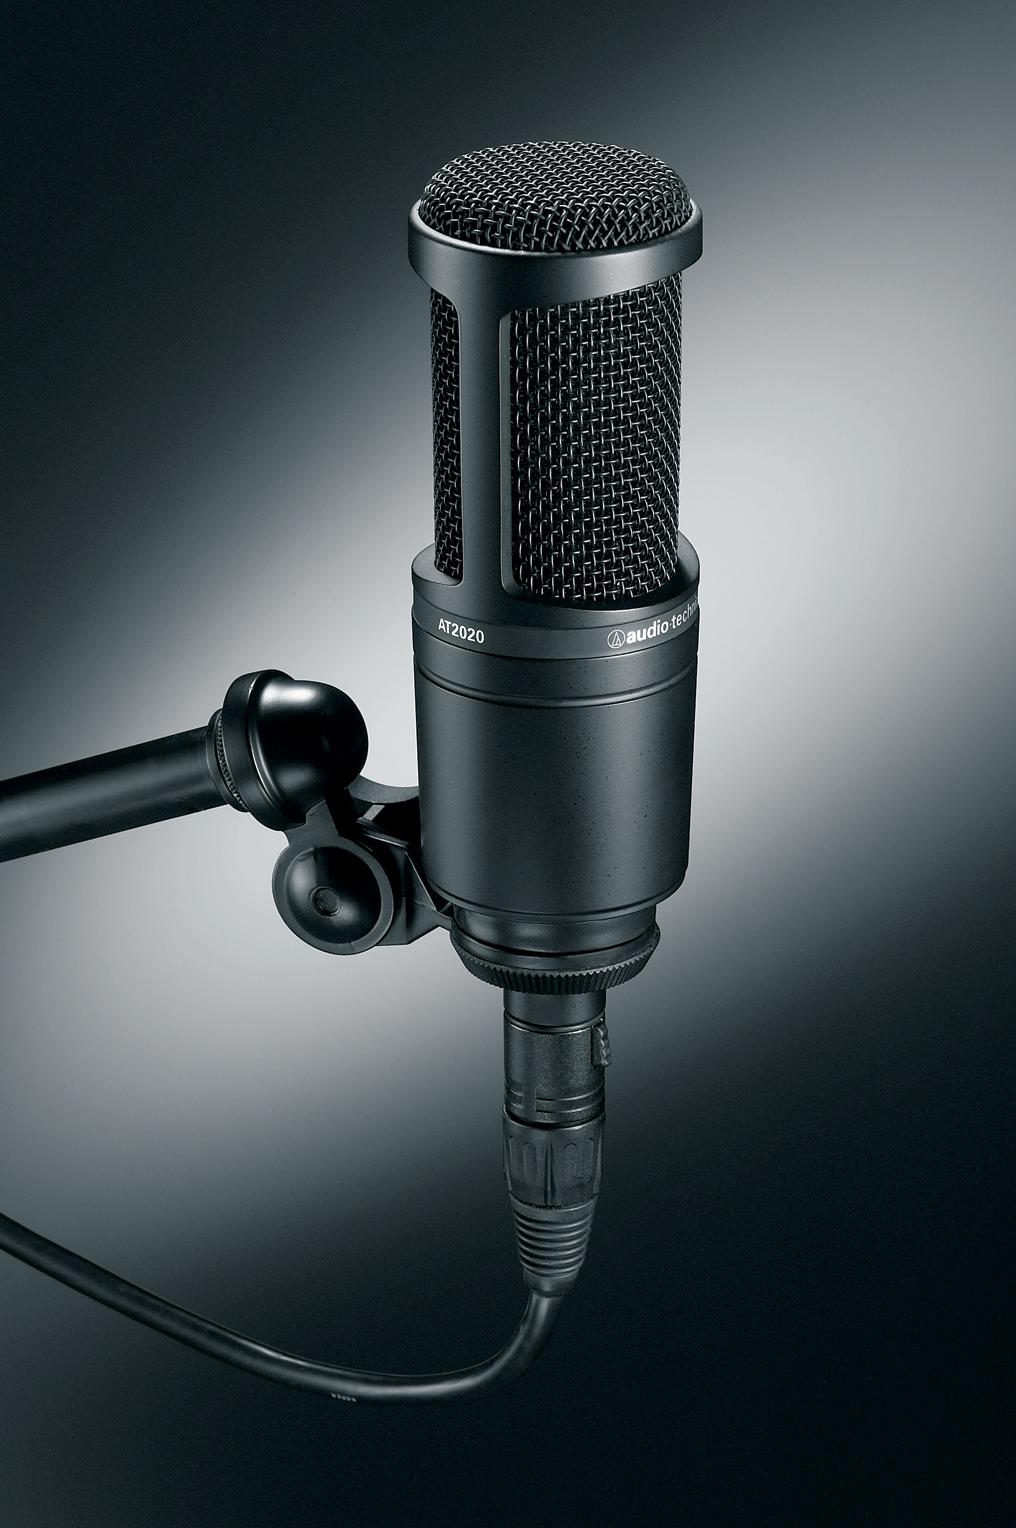 The Best Condenser Microphone Money can Buy?, Audio Issues